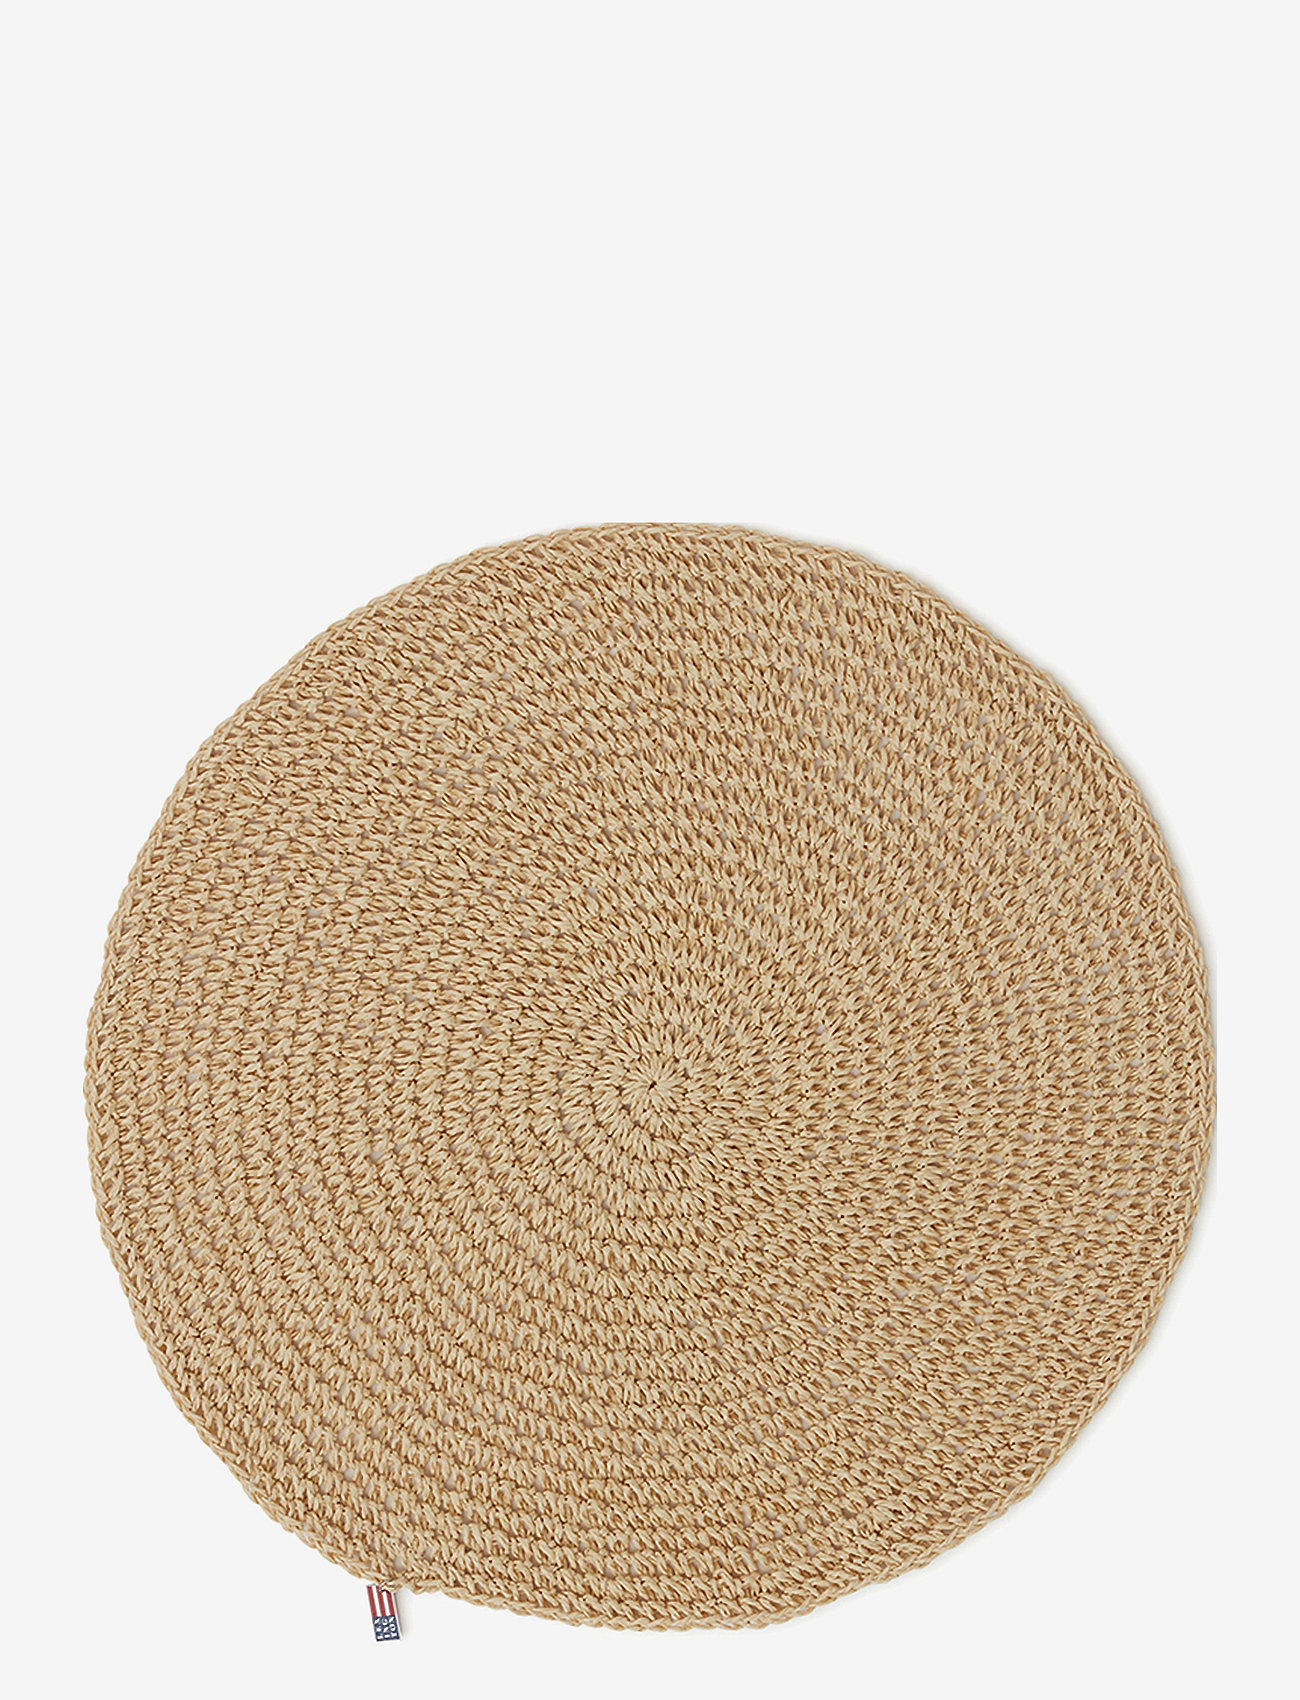 Lexington Home - Round Recycled Paper Straw Placemat - mažiausios kainos - natural - 0